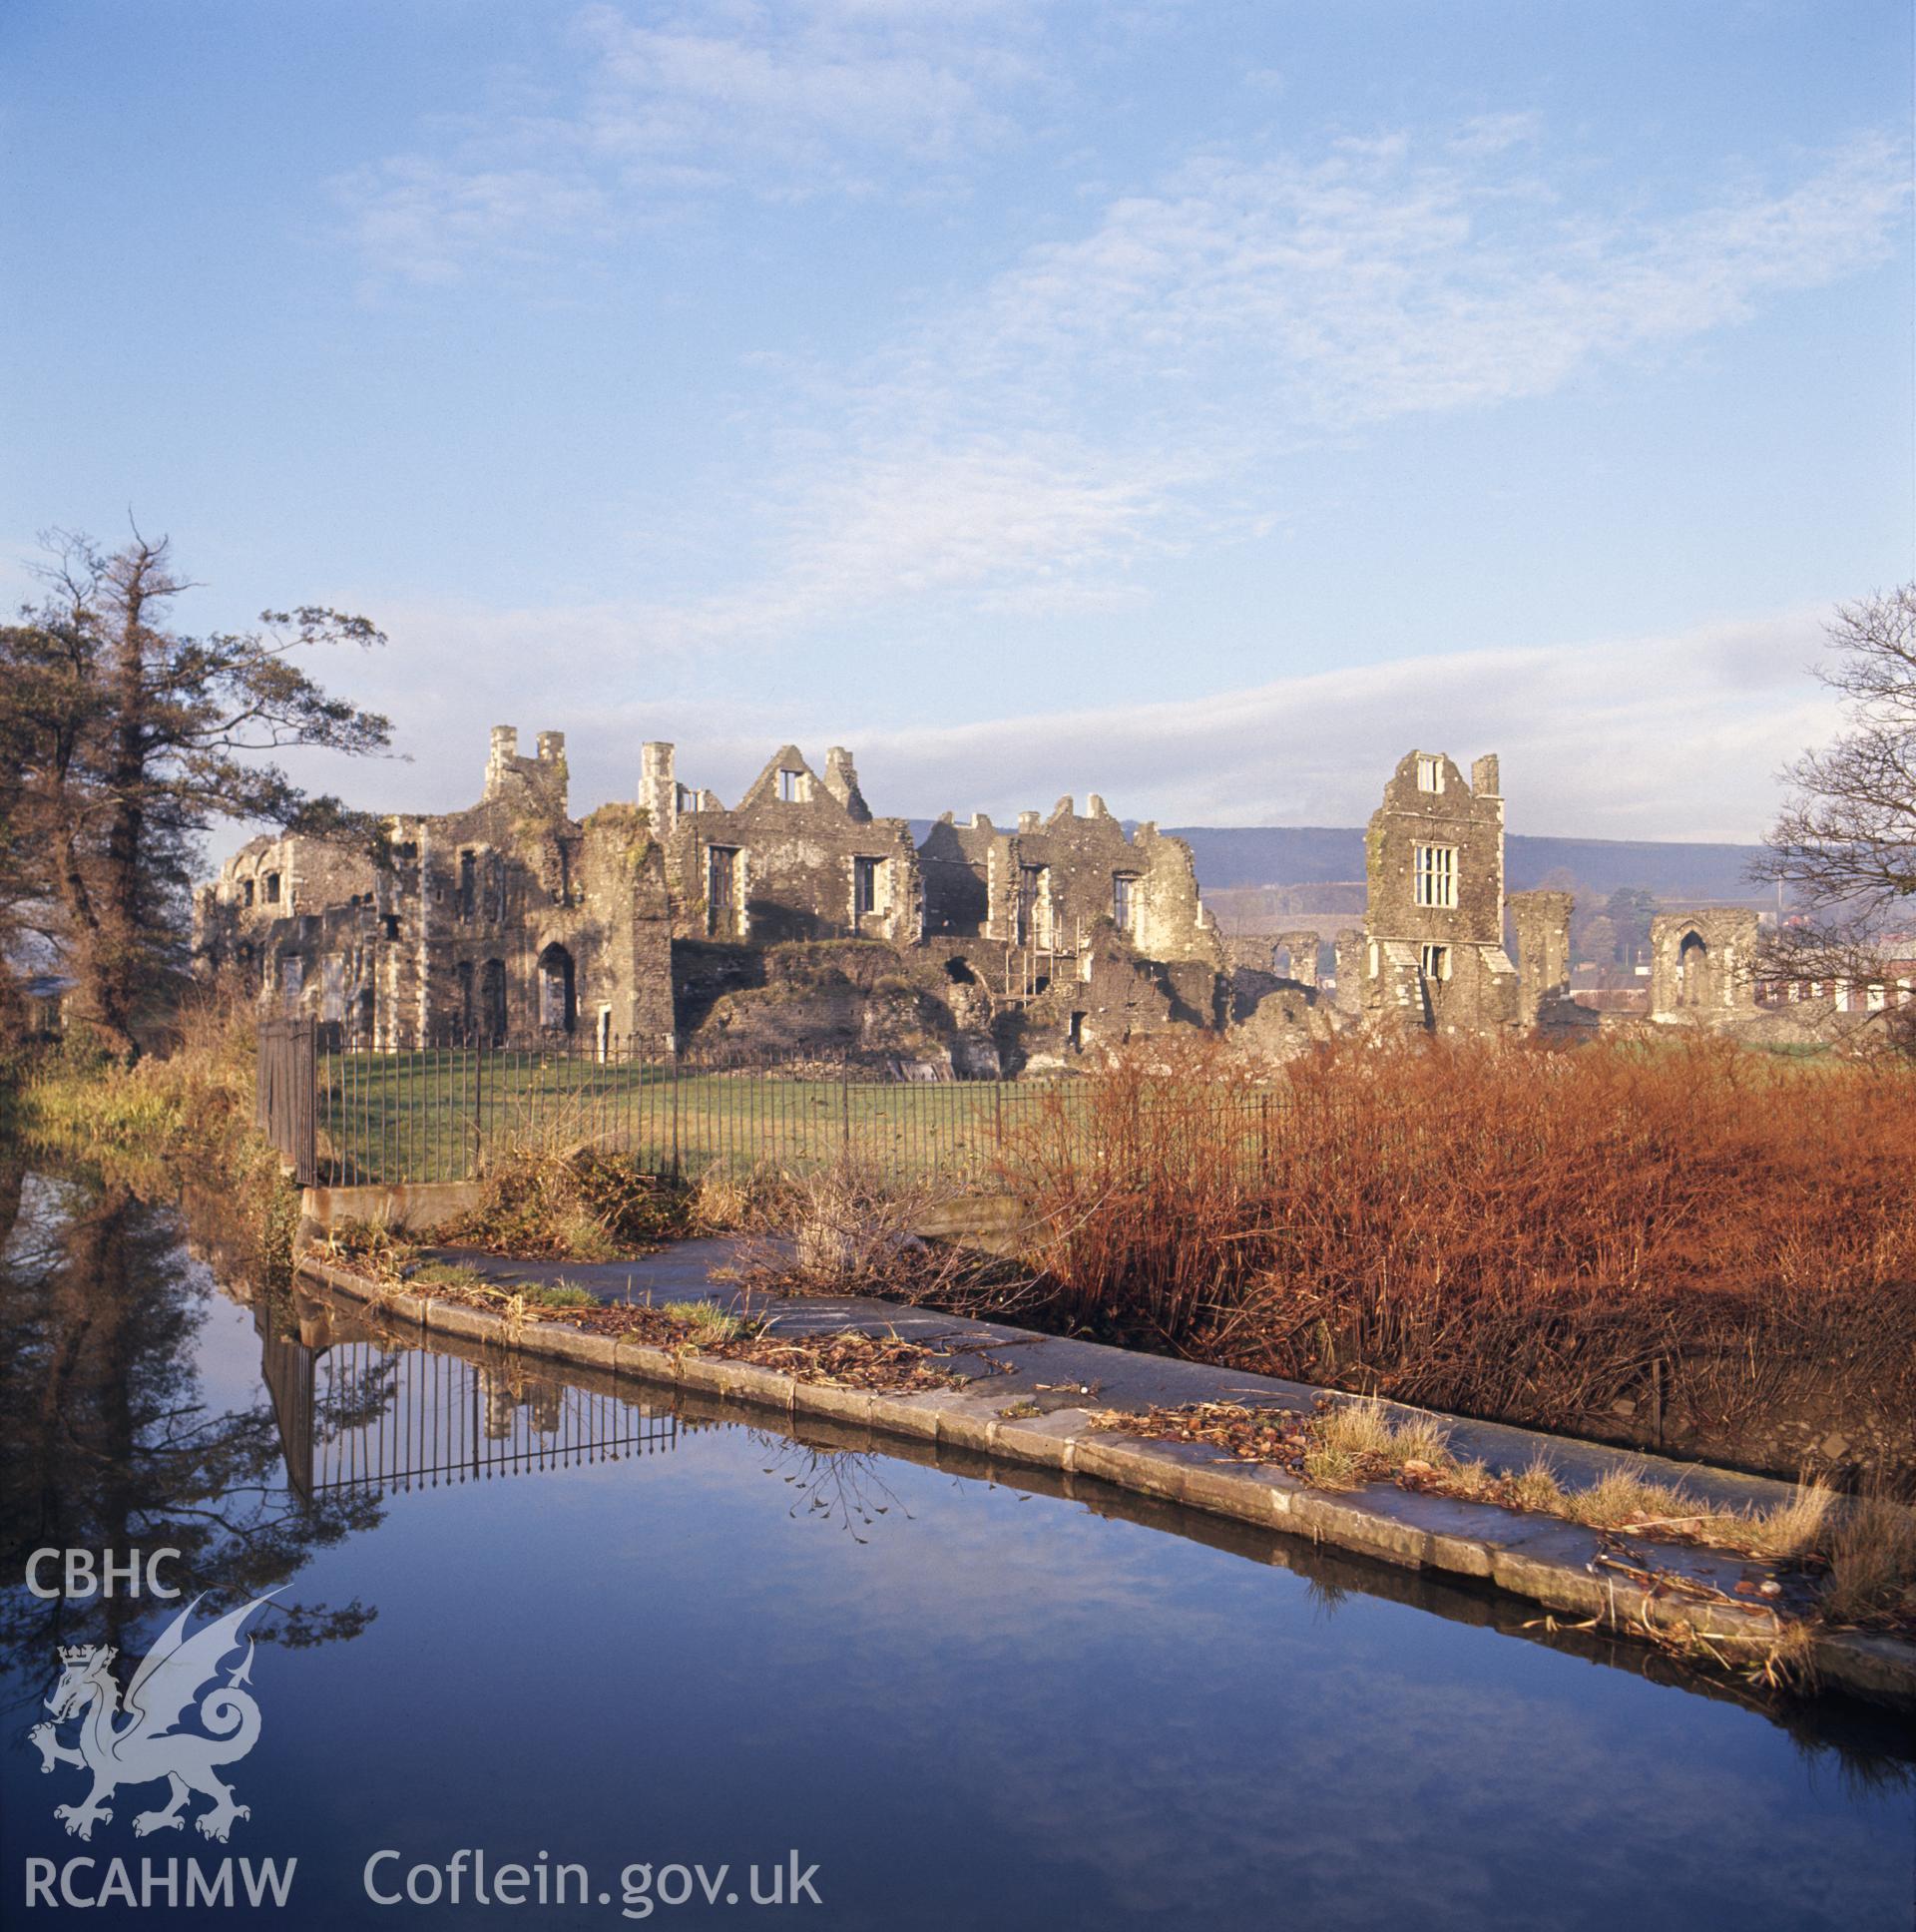 1 colour transparency showing view of Neath Abbey; collated by the former Central Office of Information.